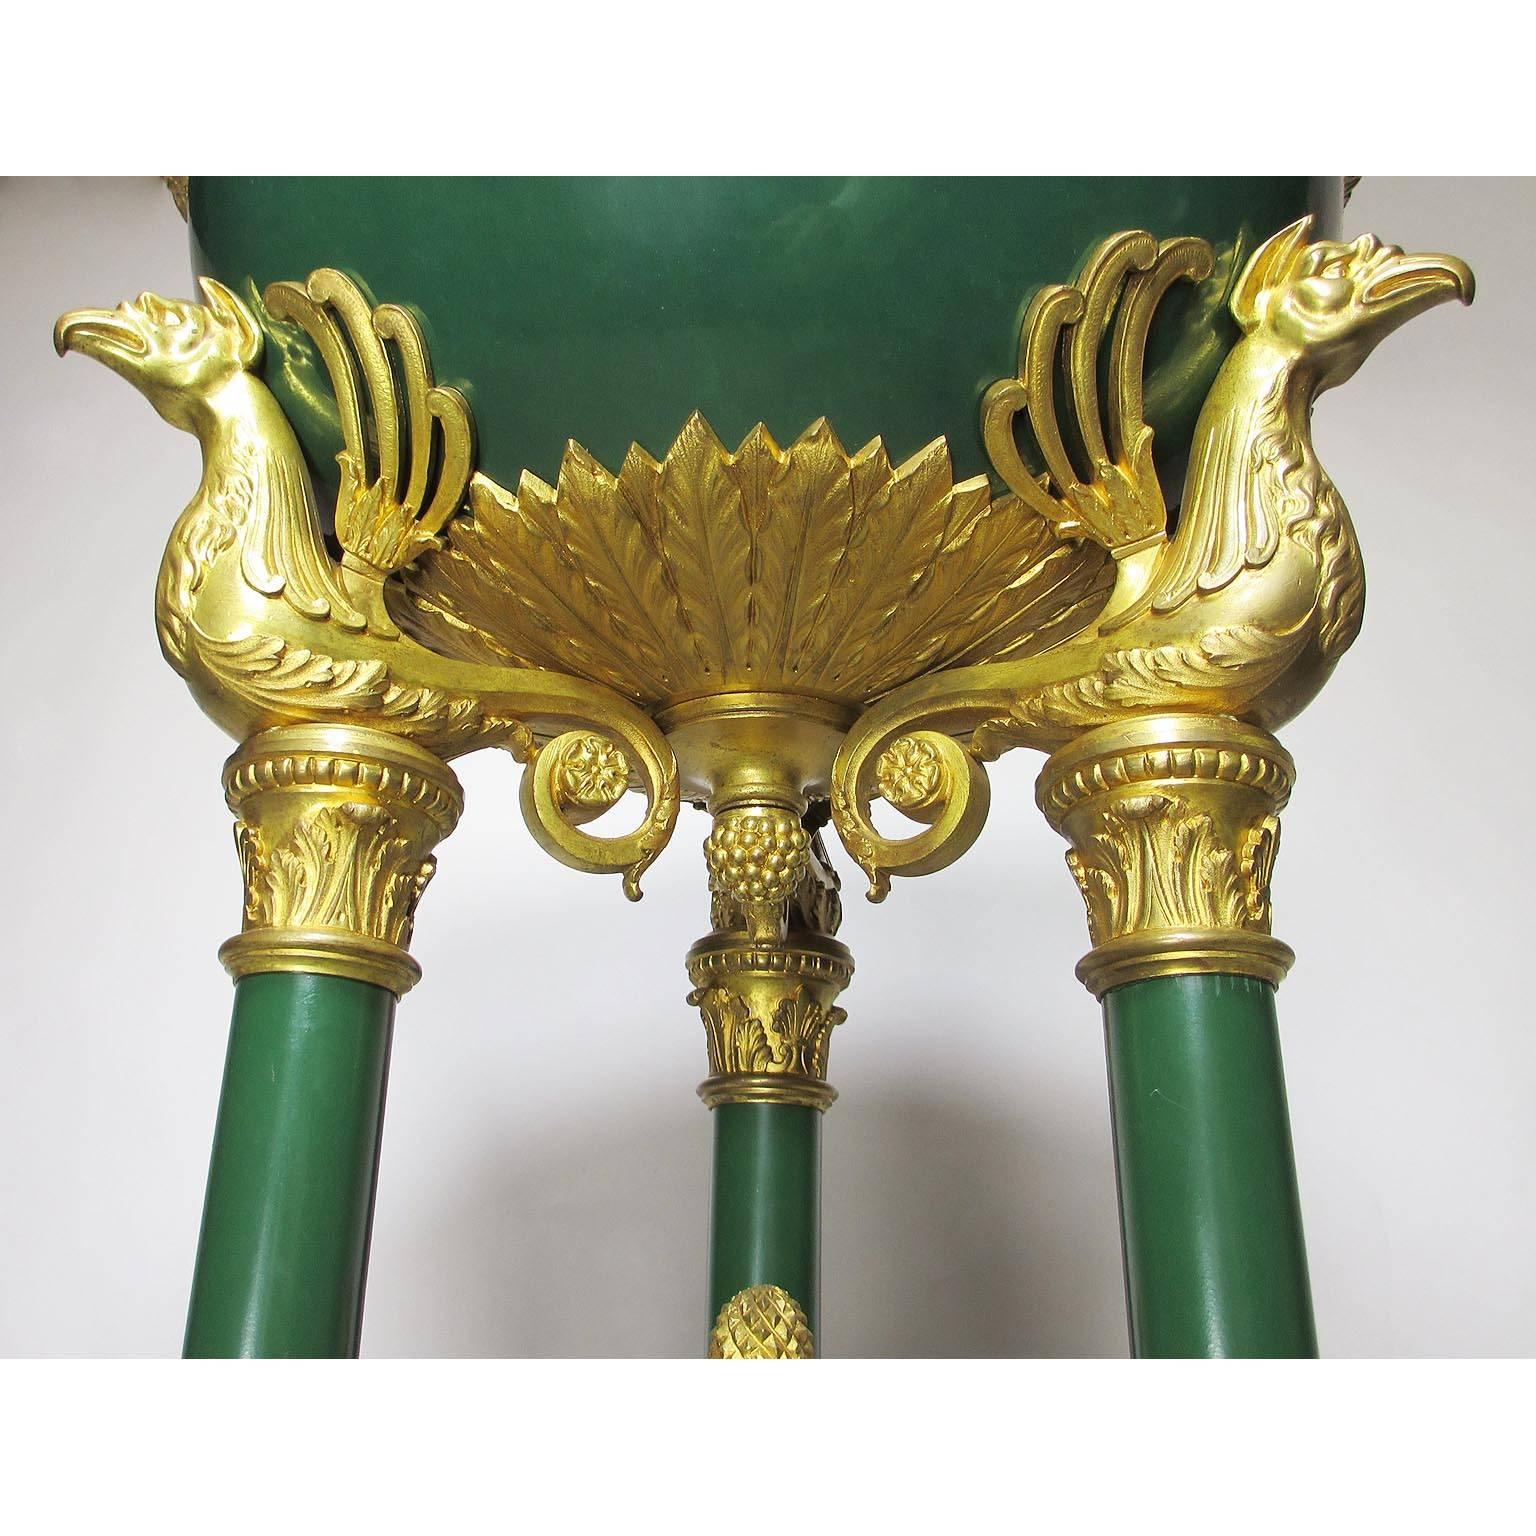 Fine French 19th Century Napoleon III Gilt Bronze-Mounted Porcelain Planter For Sale 1